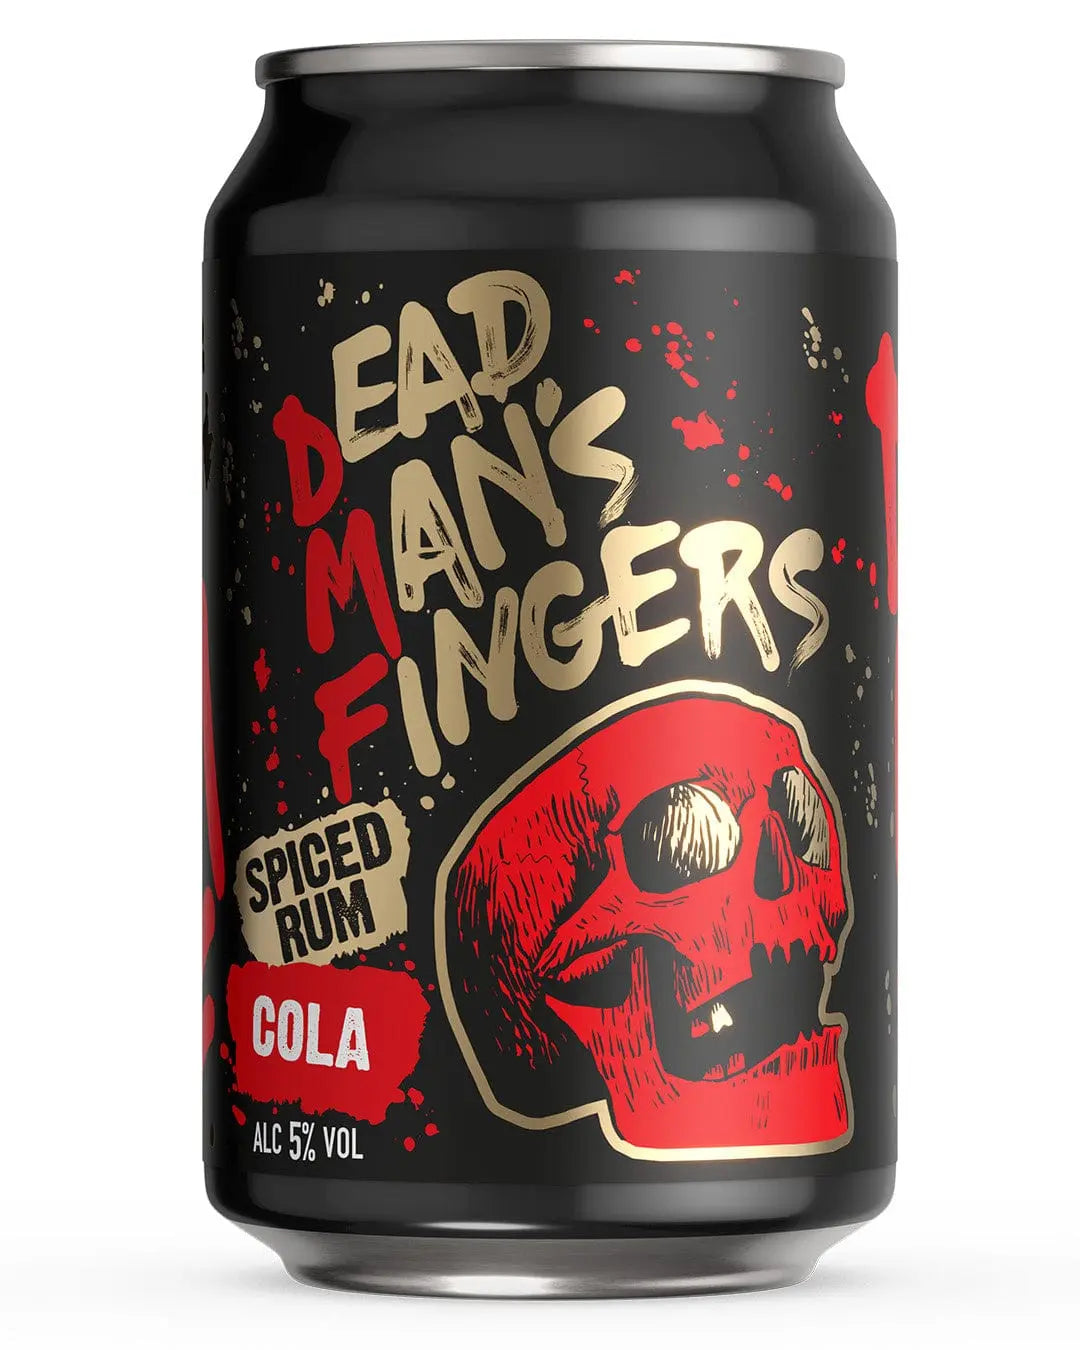 Dead Man’s Fingers Spiced Rum with Cola, 330 ml Ready Made Cocktails